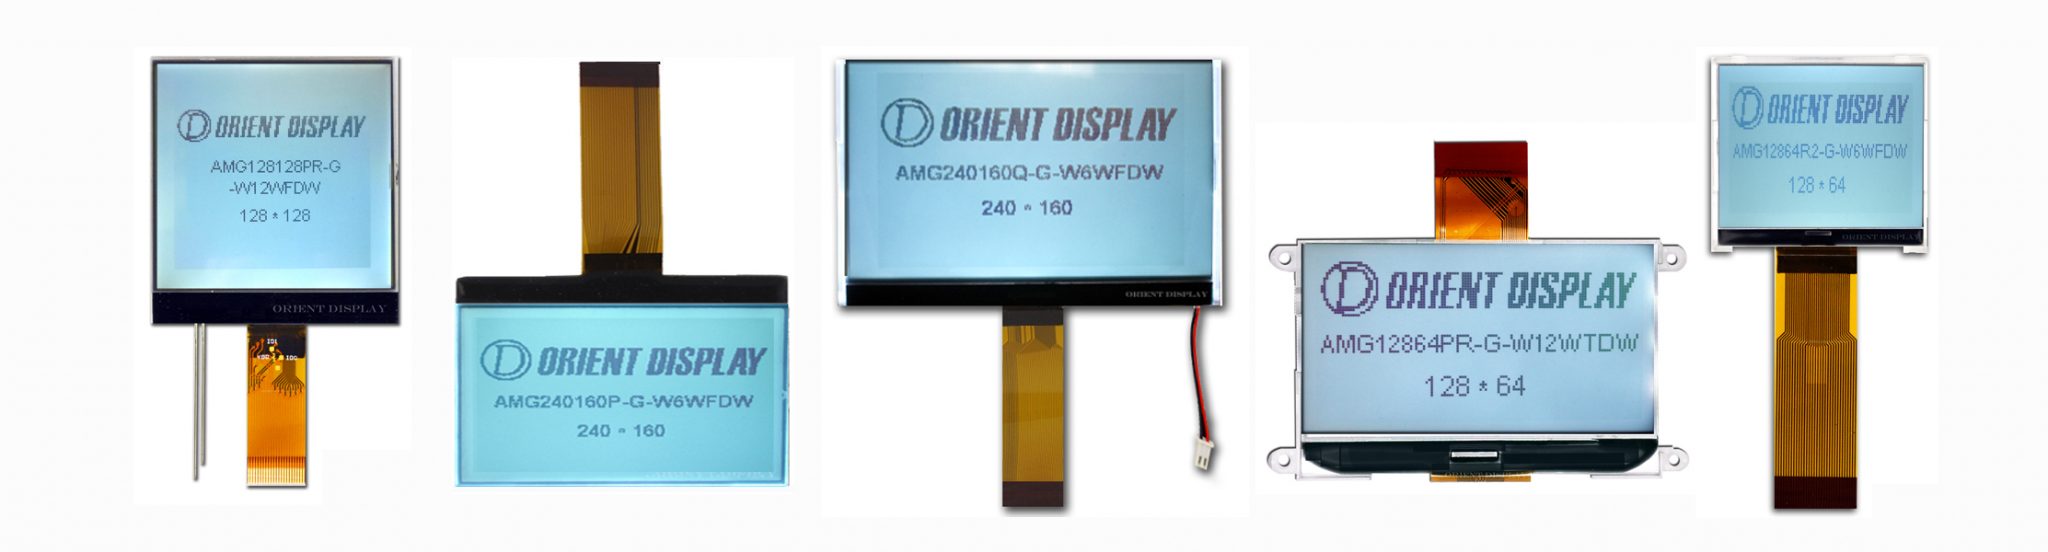 Orient Display: COG/Chip on Glass Graphic LCD Display, multiple resolution choices, FSTN Positive, White LED Backlight